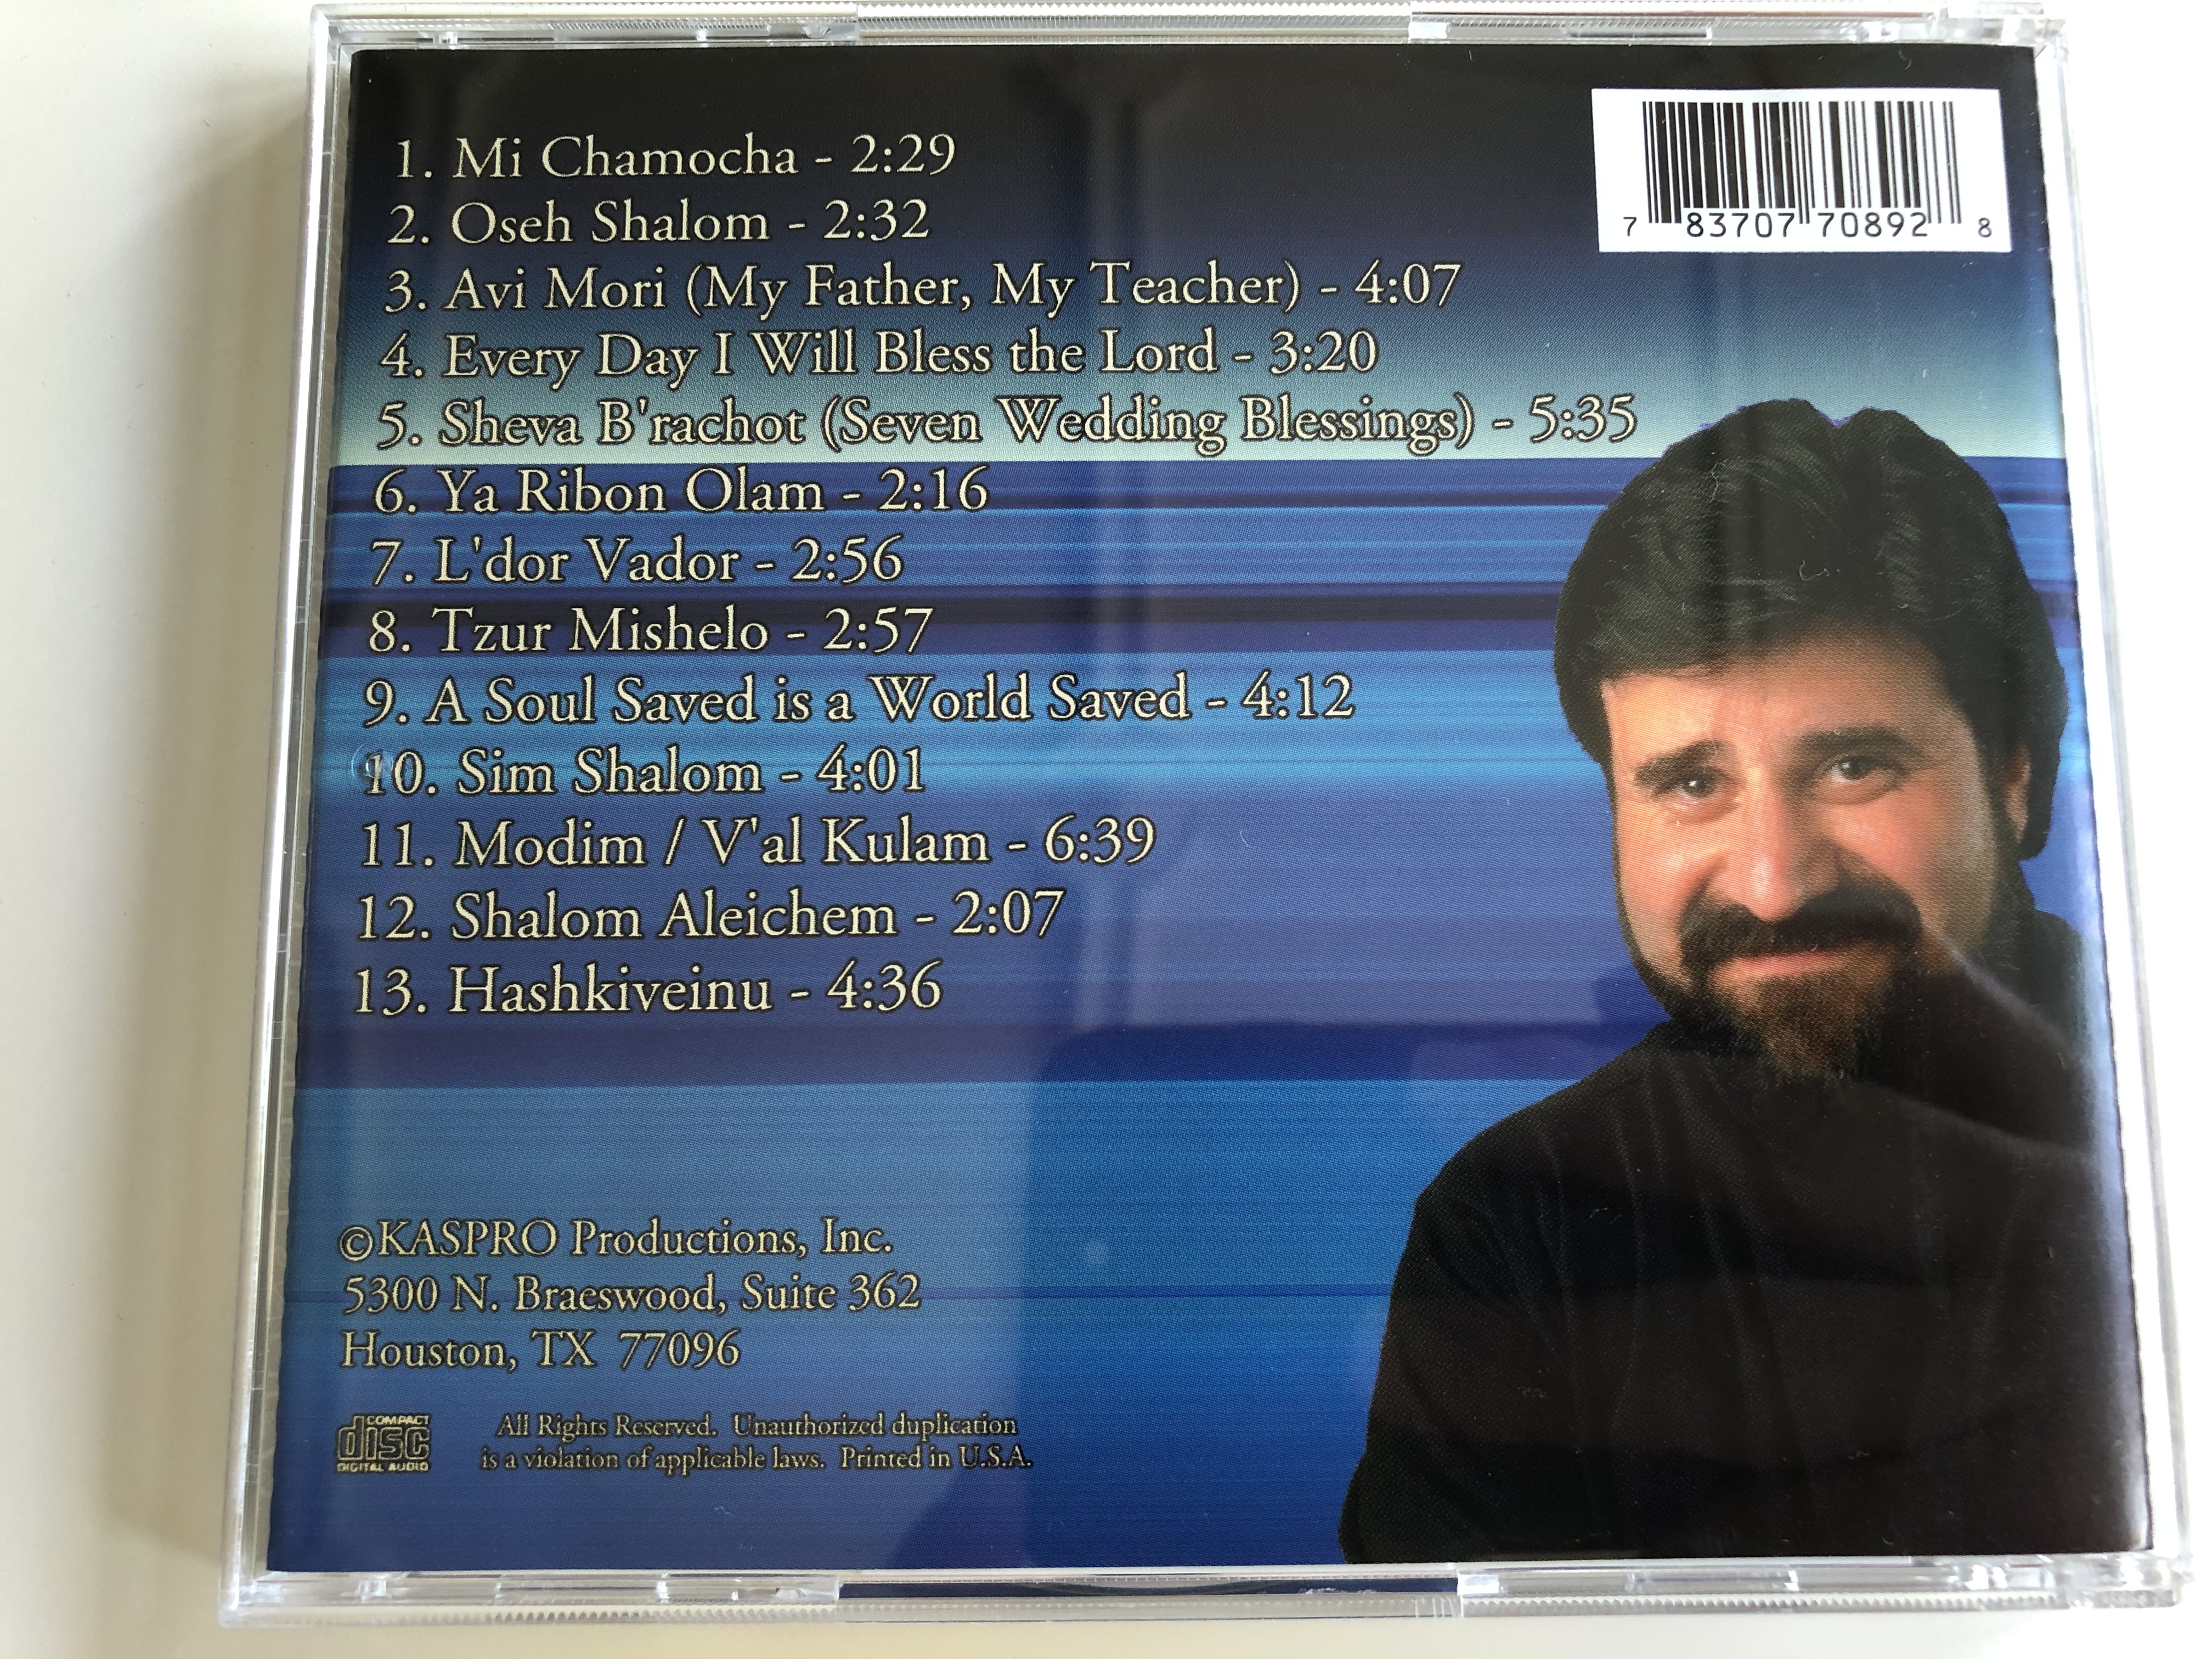 vision-in-prayer-cantor-david-propis-traditional-prayers-in-contemporary-settins-composed-by-cantor-meir-finkelstein-audio-cd-1995-7-.jpg